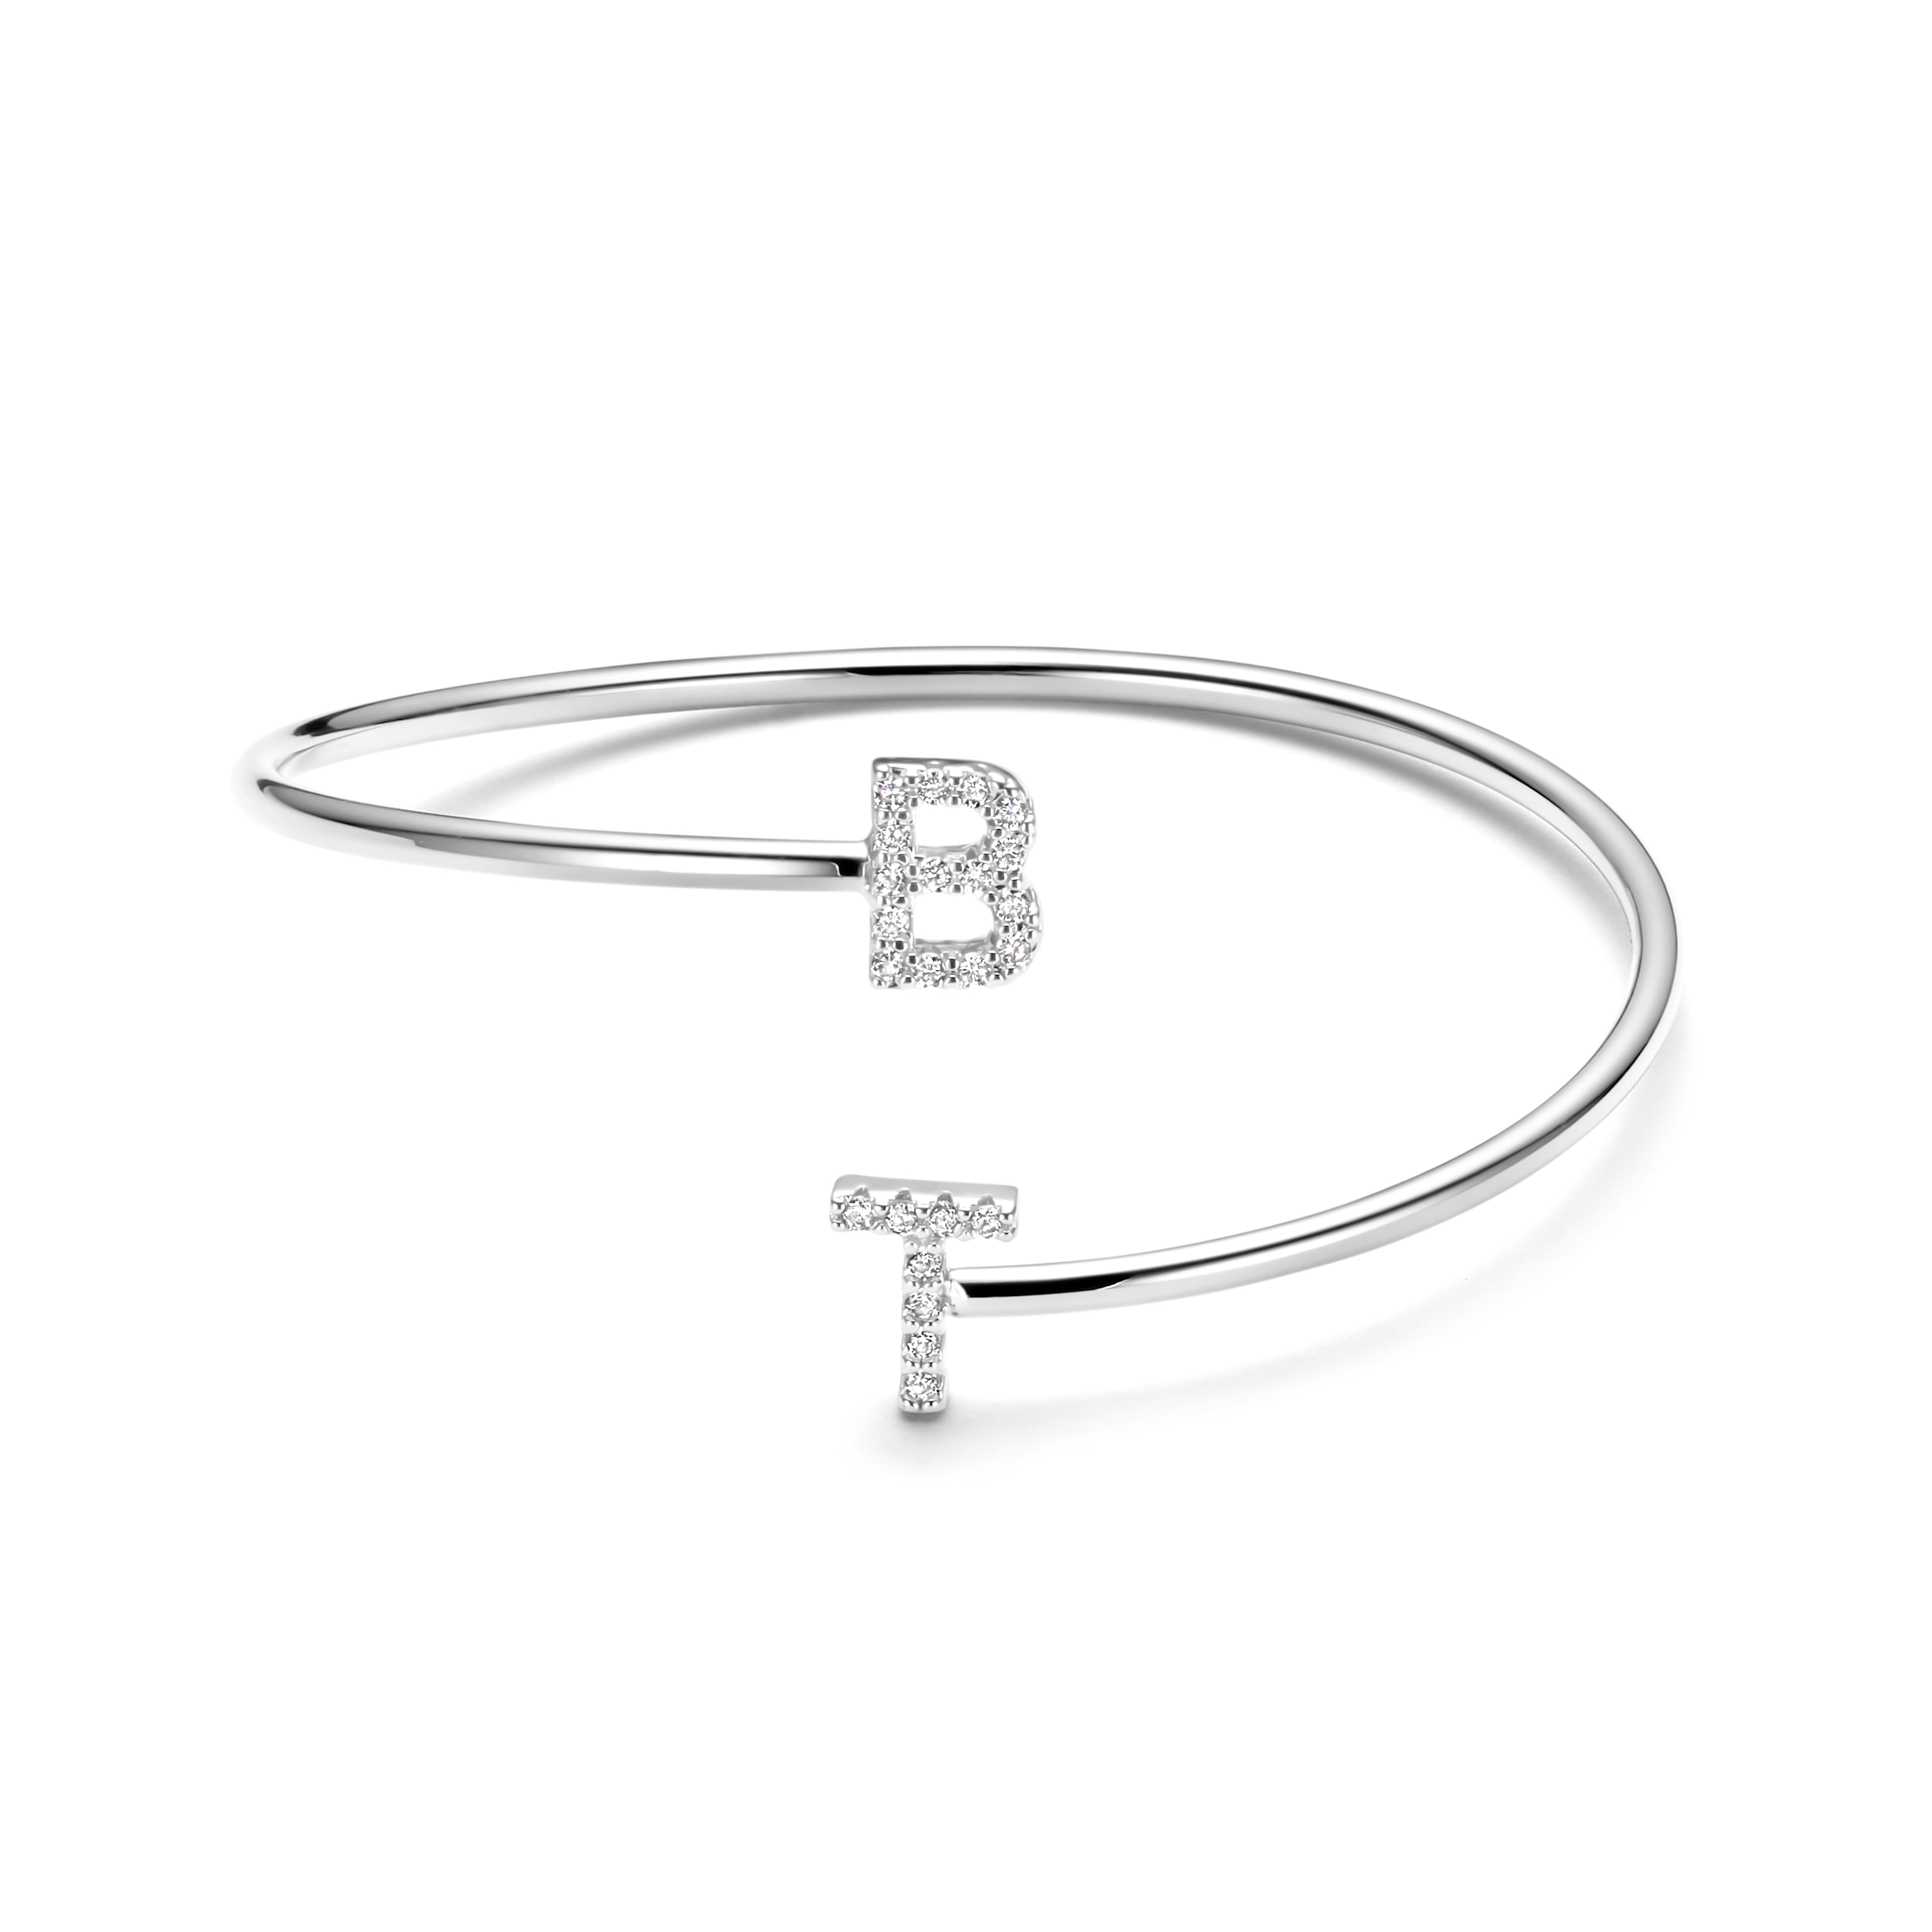 CUSTOMMADE TWISTED INITIAL BRACELET [2 initials]